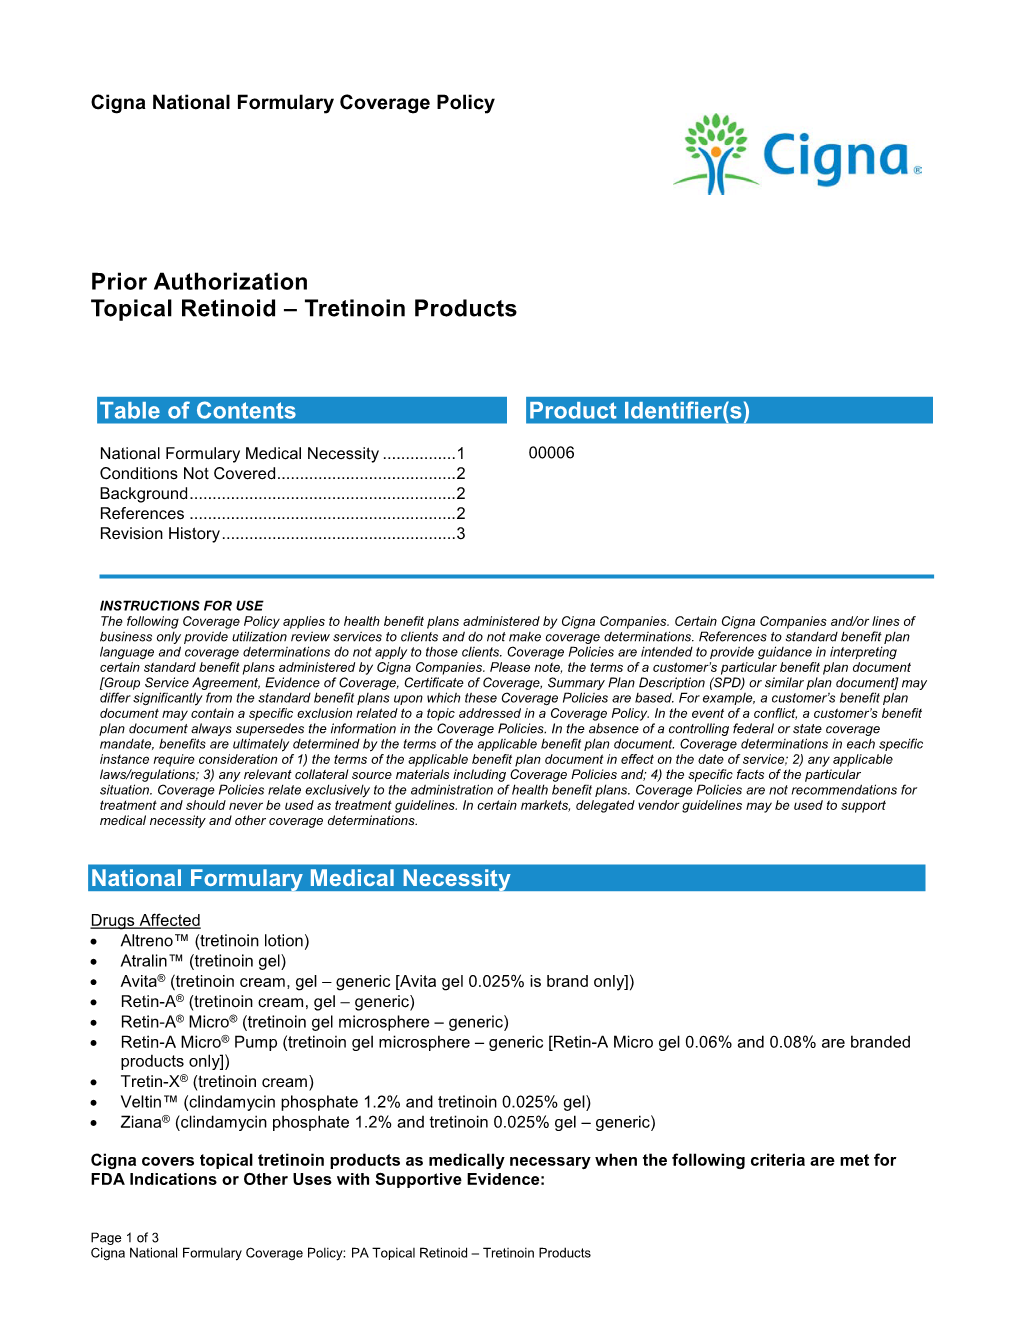 Topical Retinoid – Tretinoin Products